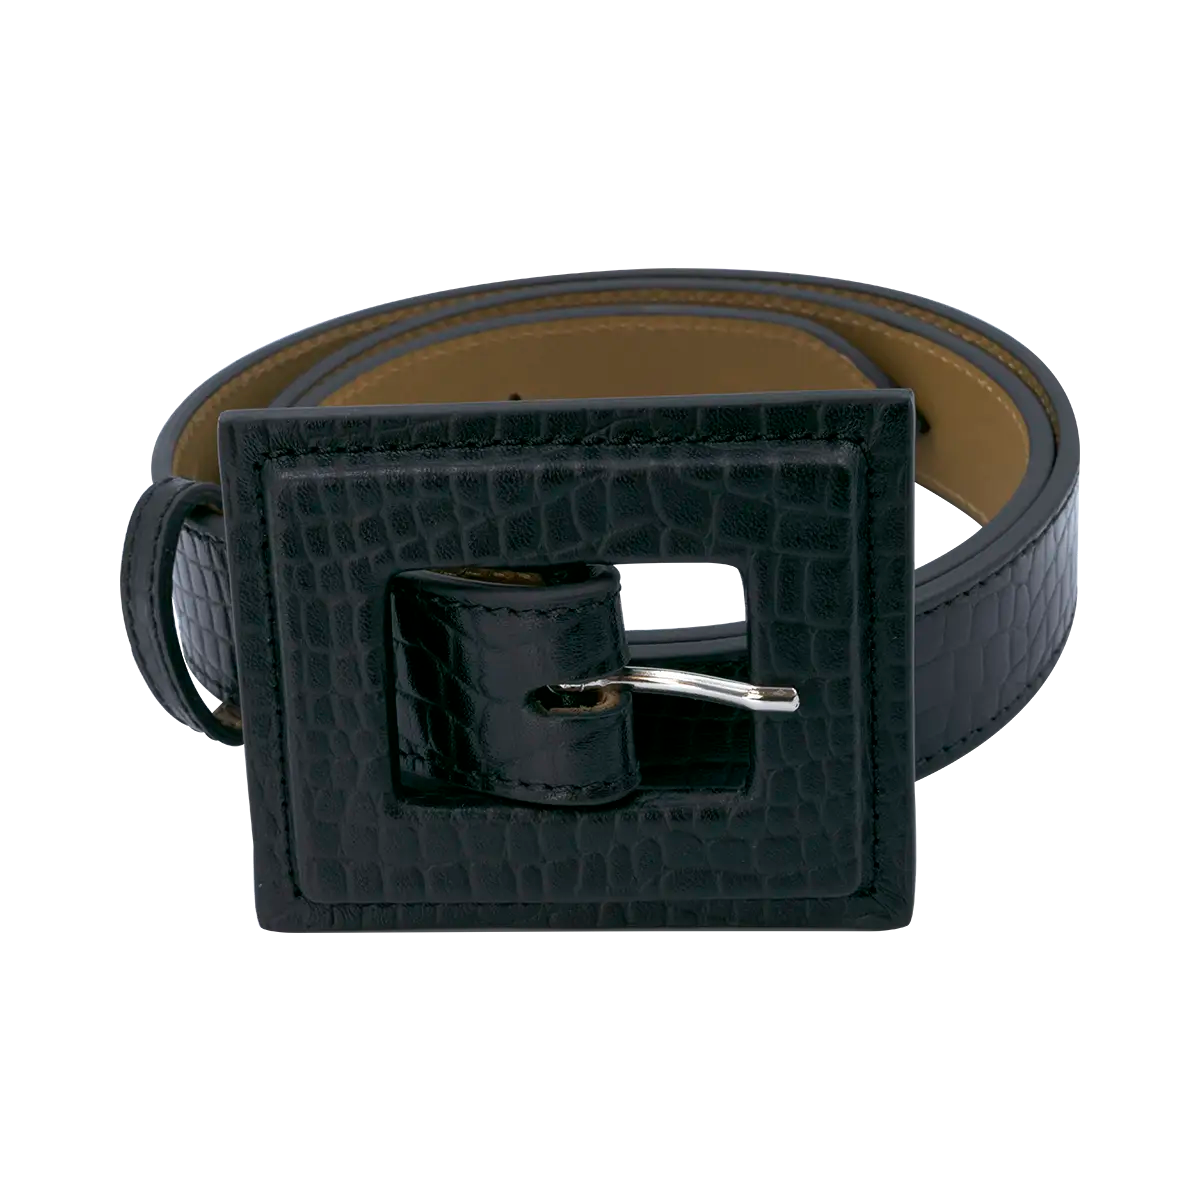 black  leather print belt with a large square buckle. Accessory for women in San Diego, CA.